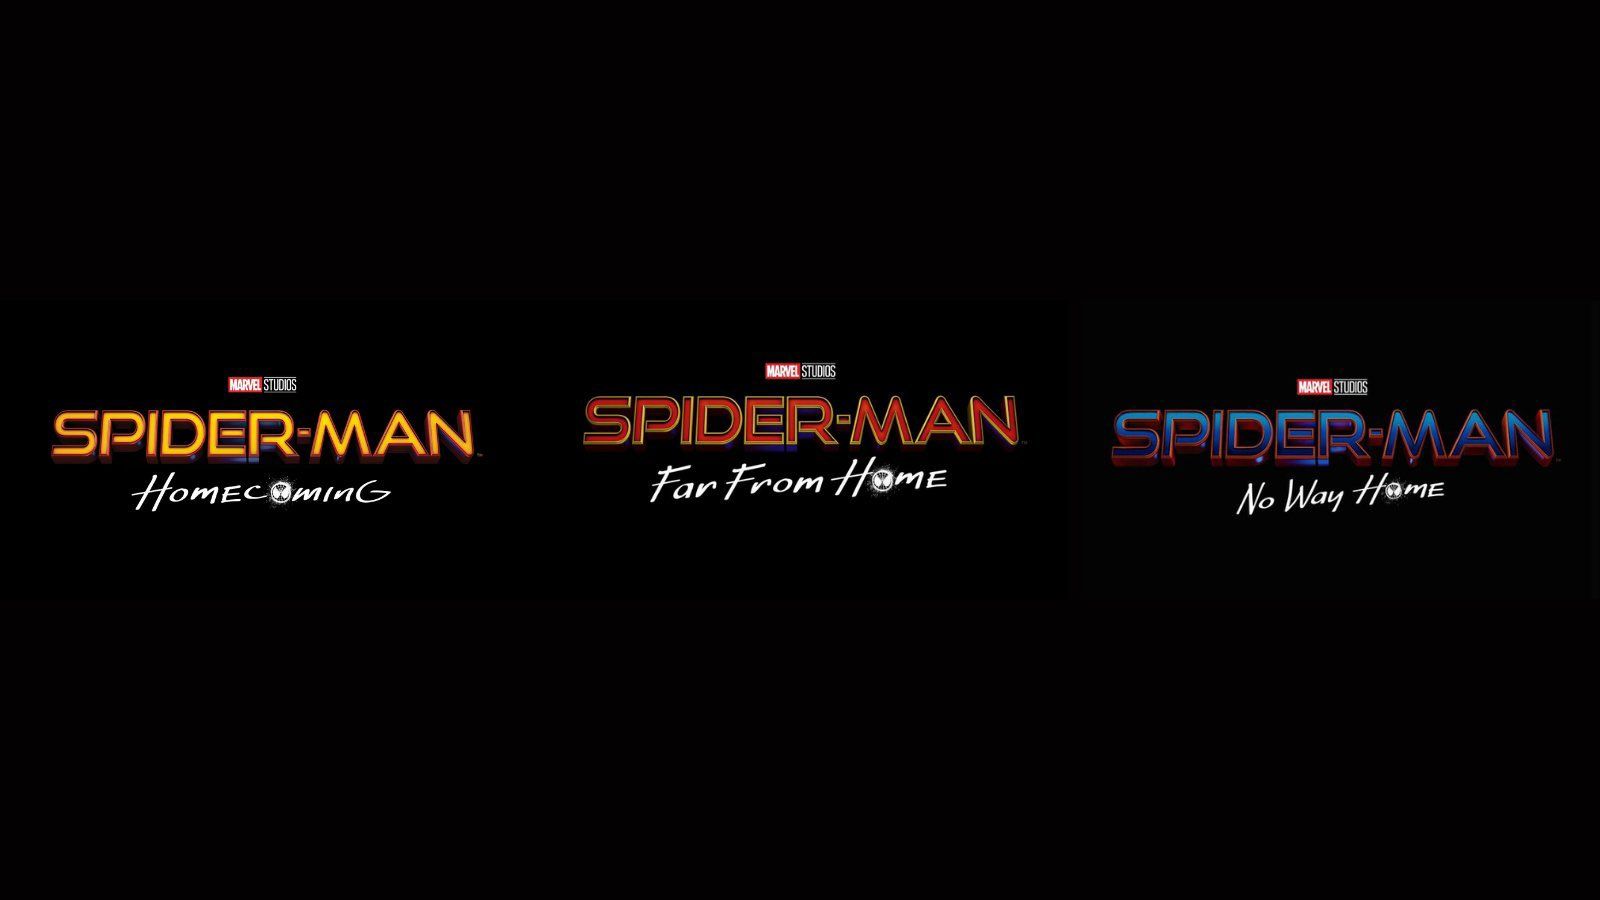 Finally! Spider Man Finally Has ANOTHER Trilogy. Only Took Him 14 Years But Still This Is Amazing To See!